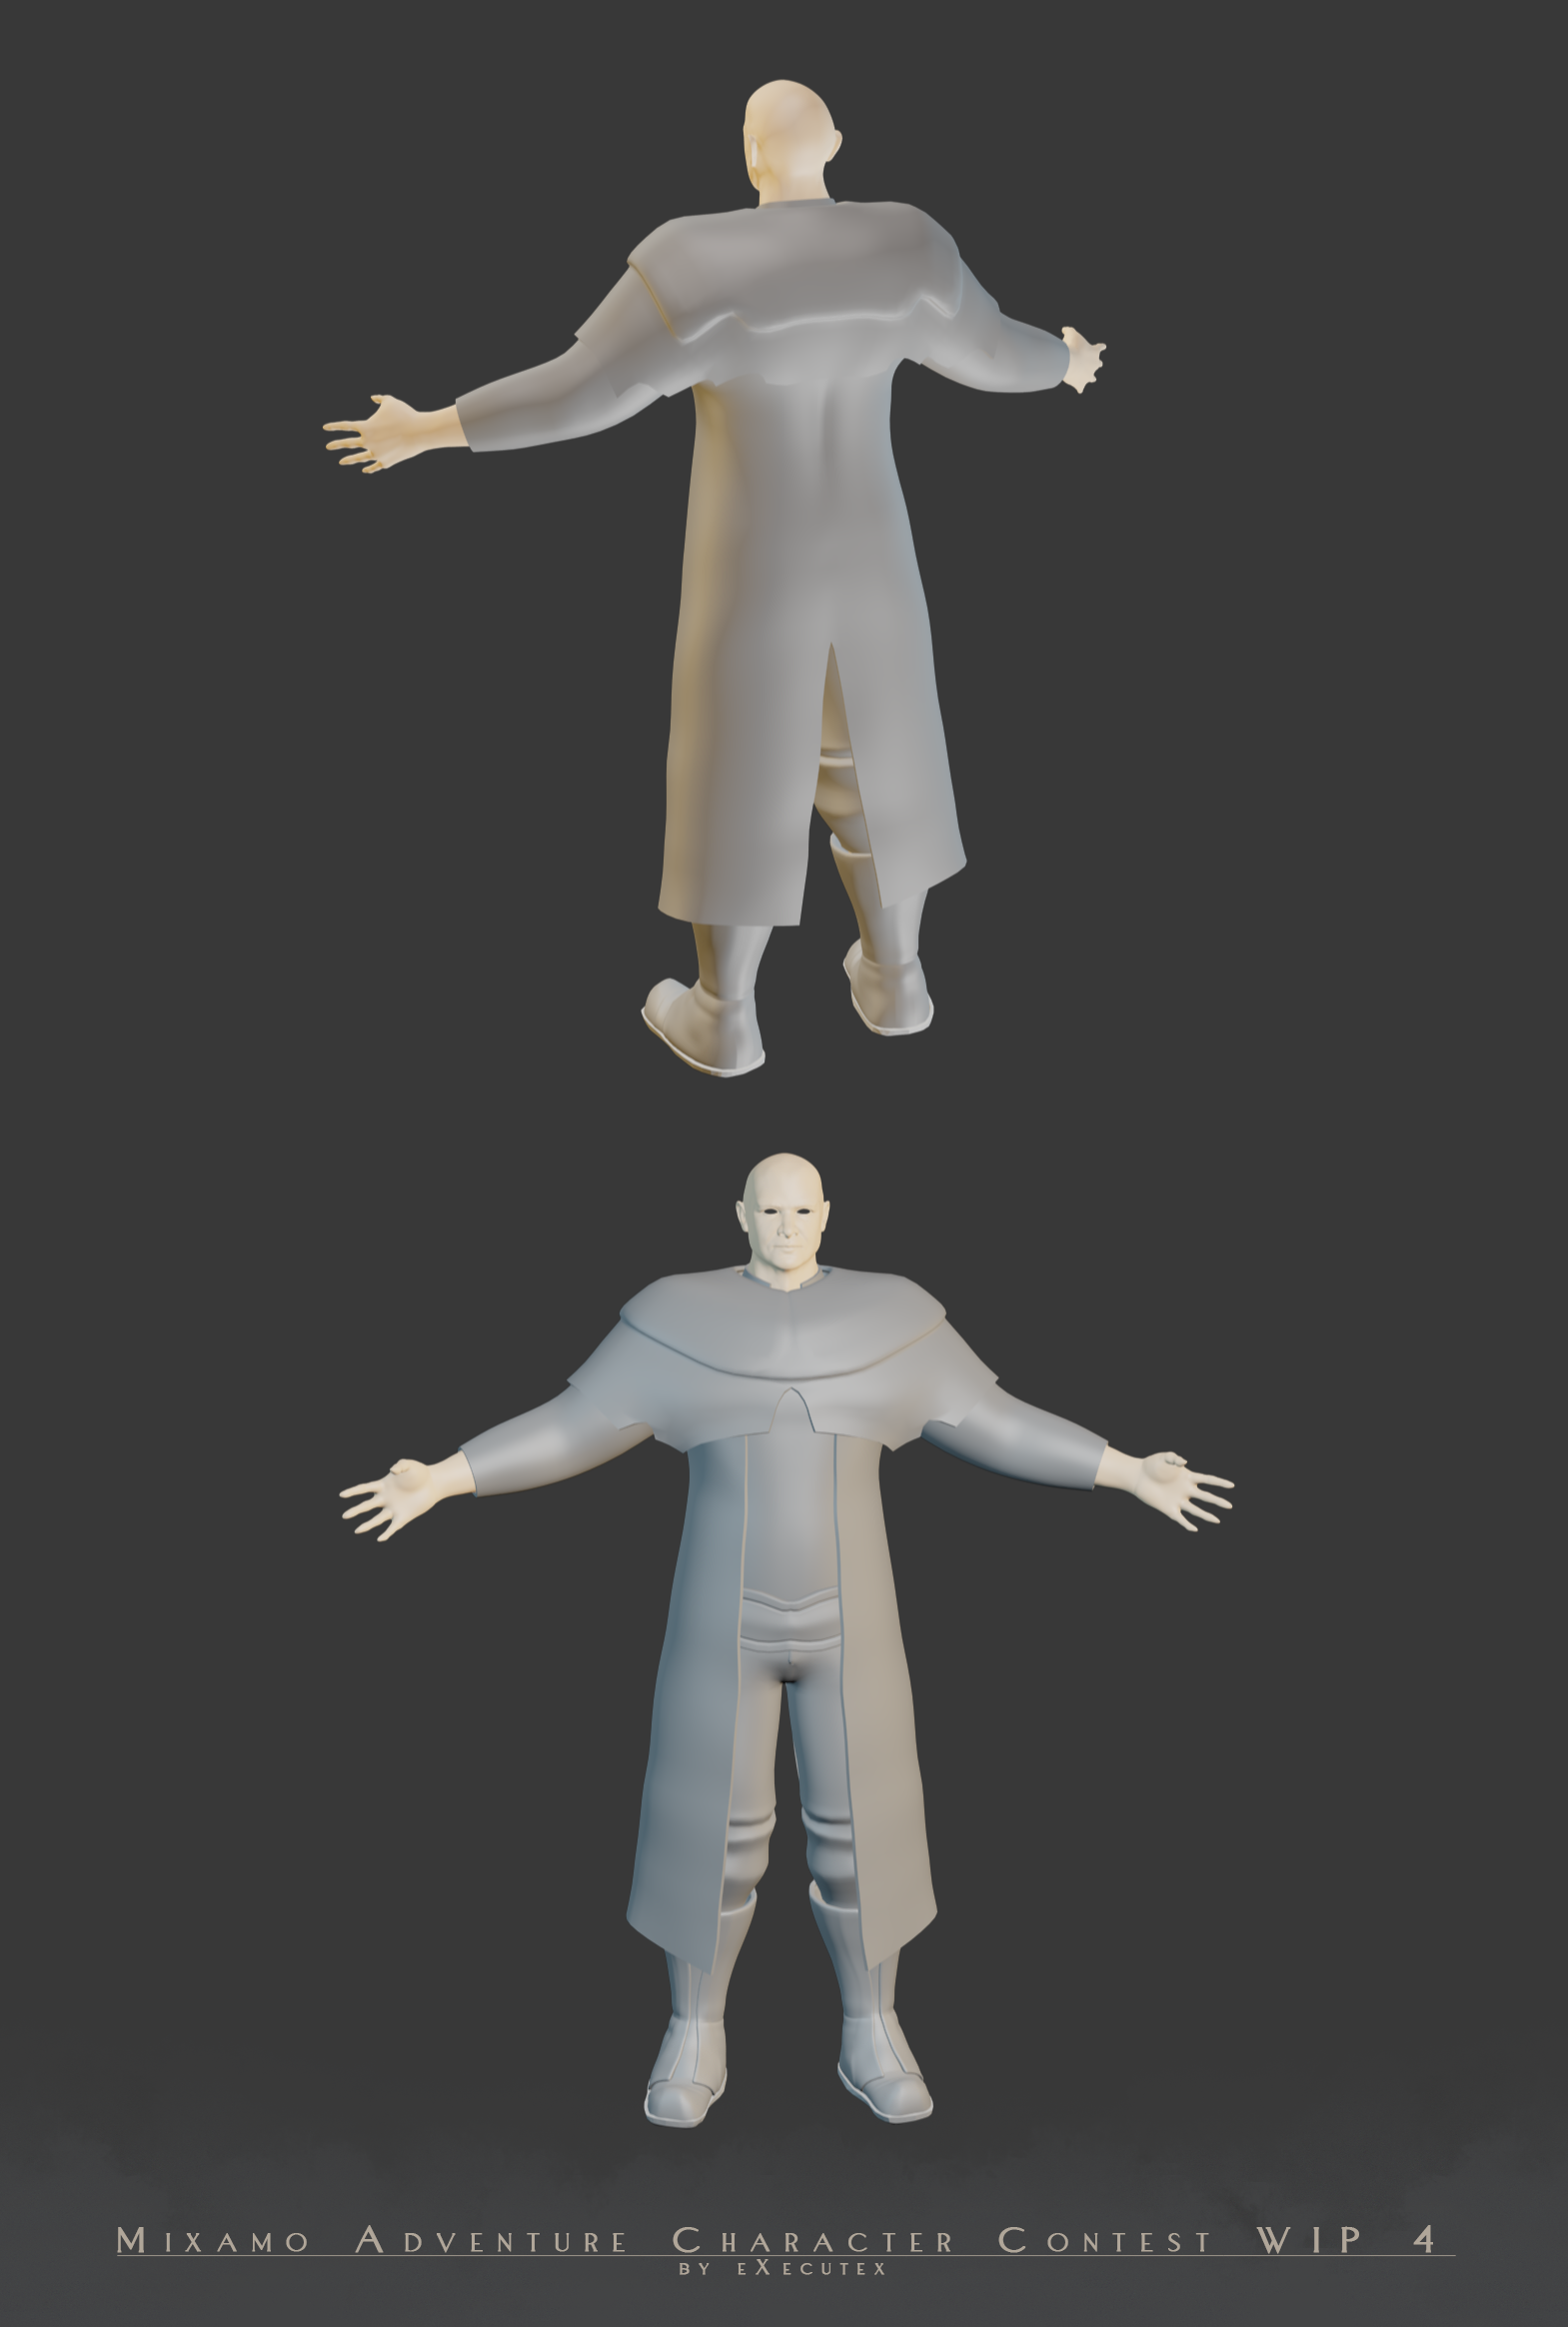 mixamo_adventure_character_by_executex_wip_4_by_executex-d6a2tc5.png